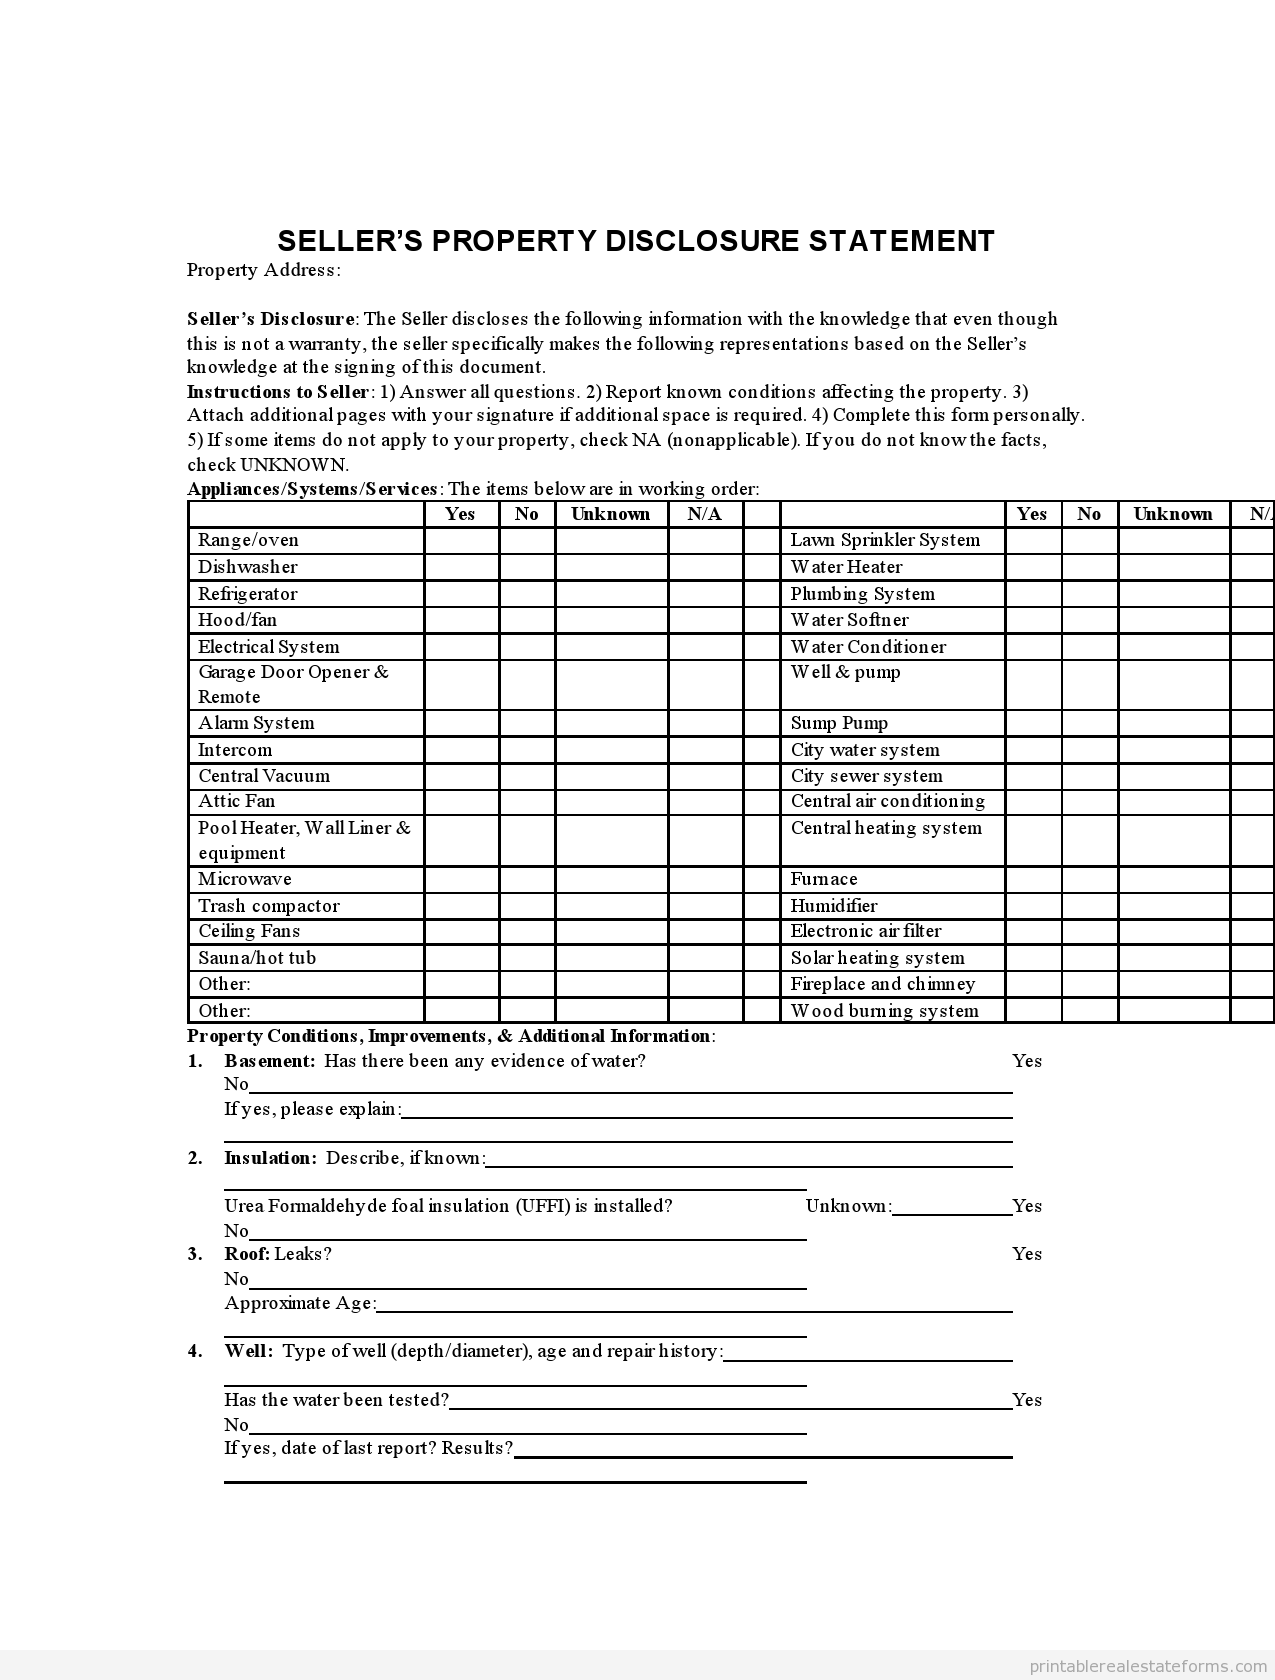 SELLER Property Disclosure Statment0001